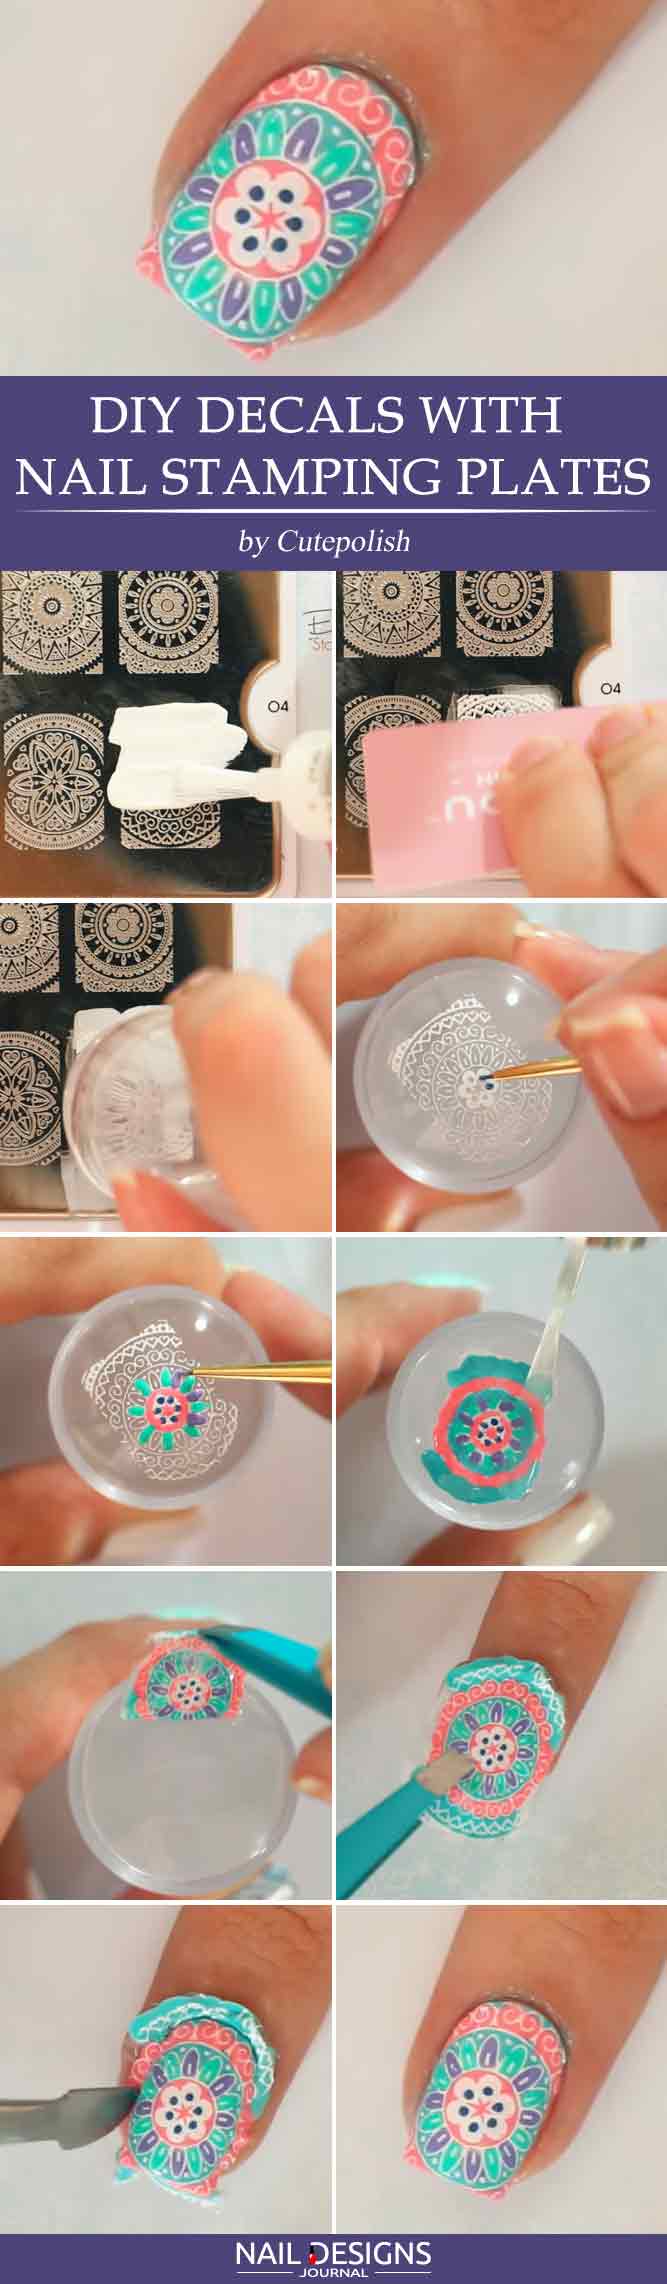 DIY Decals With Nail Stamping Plates